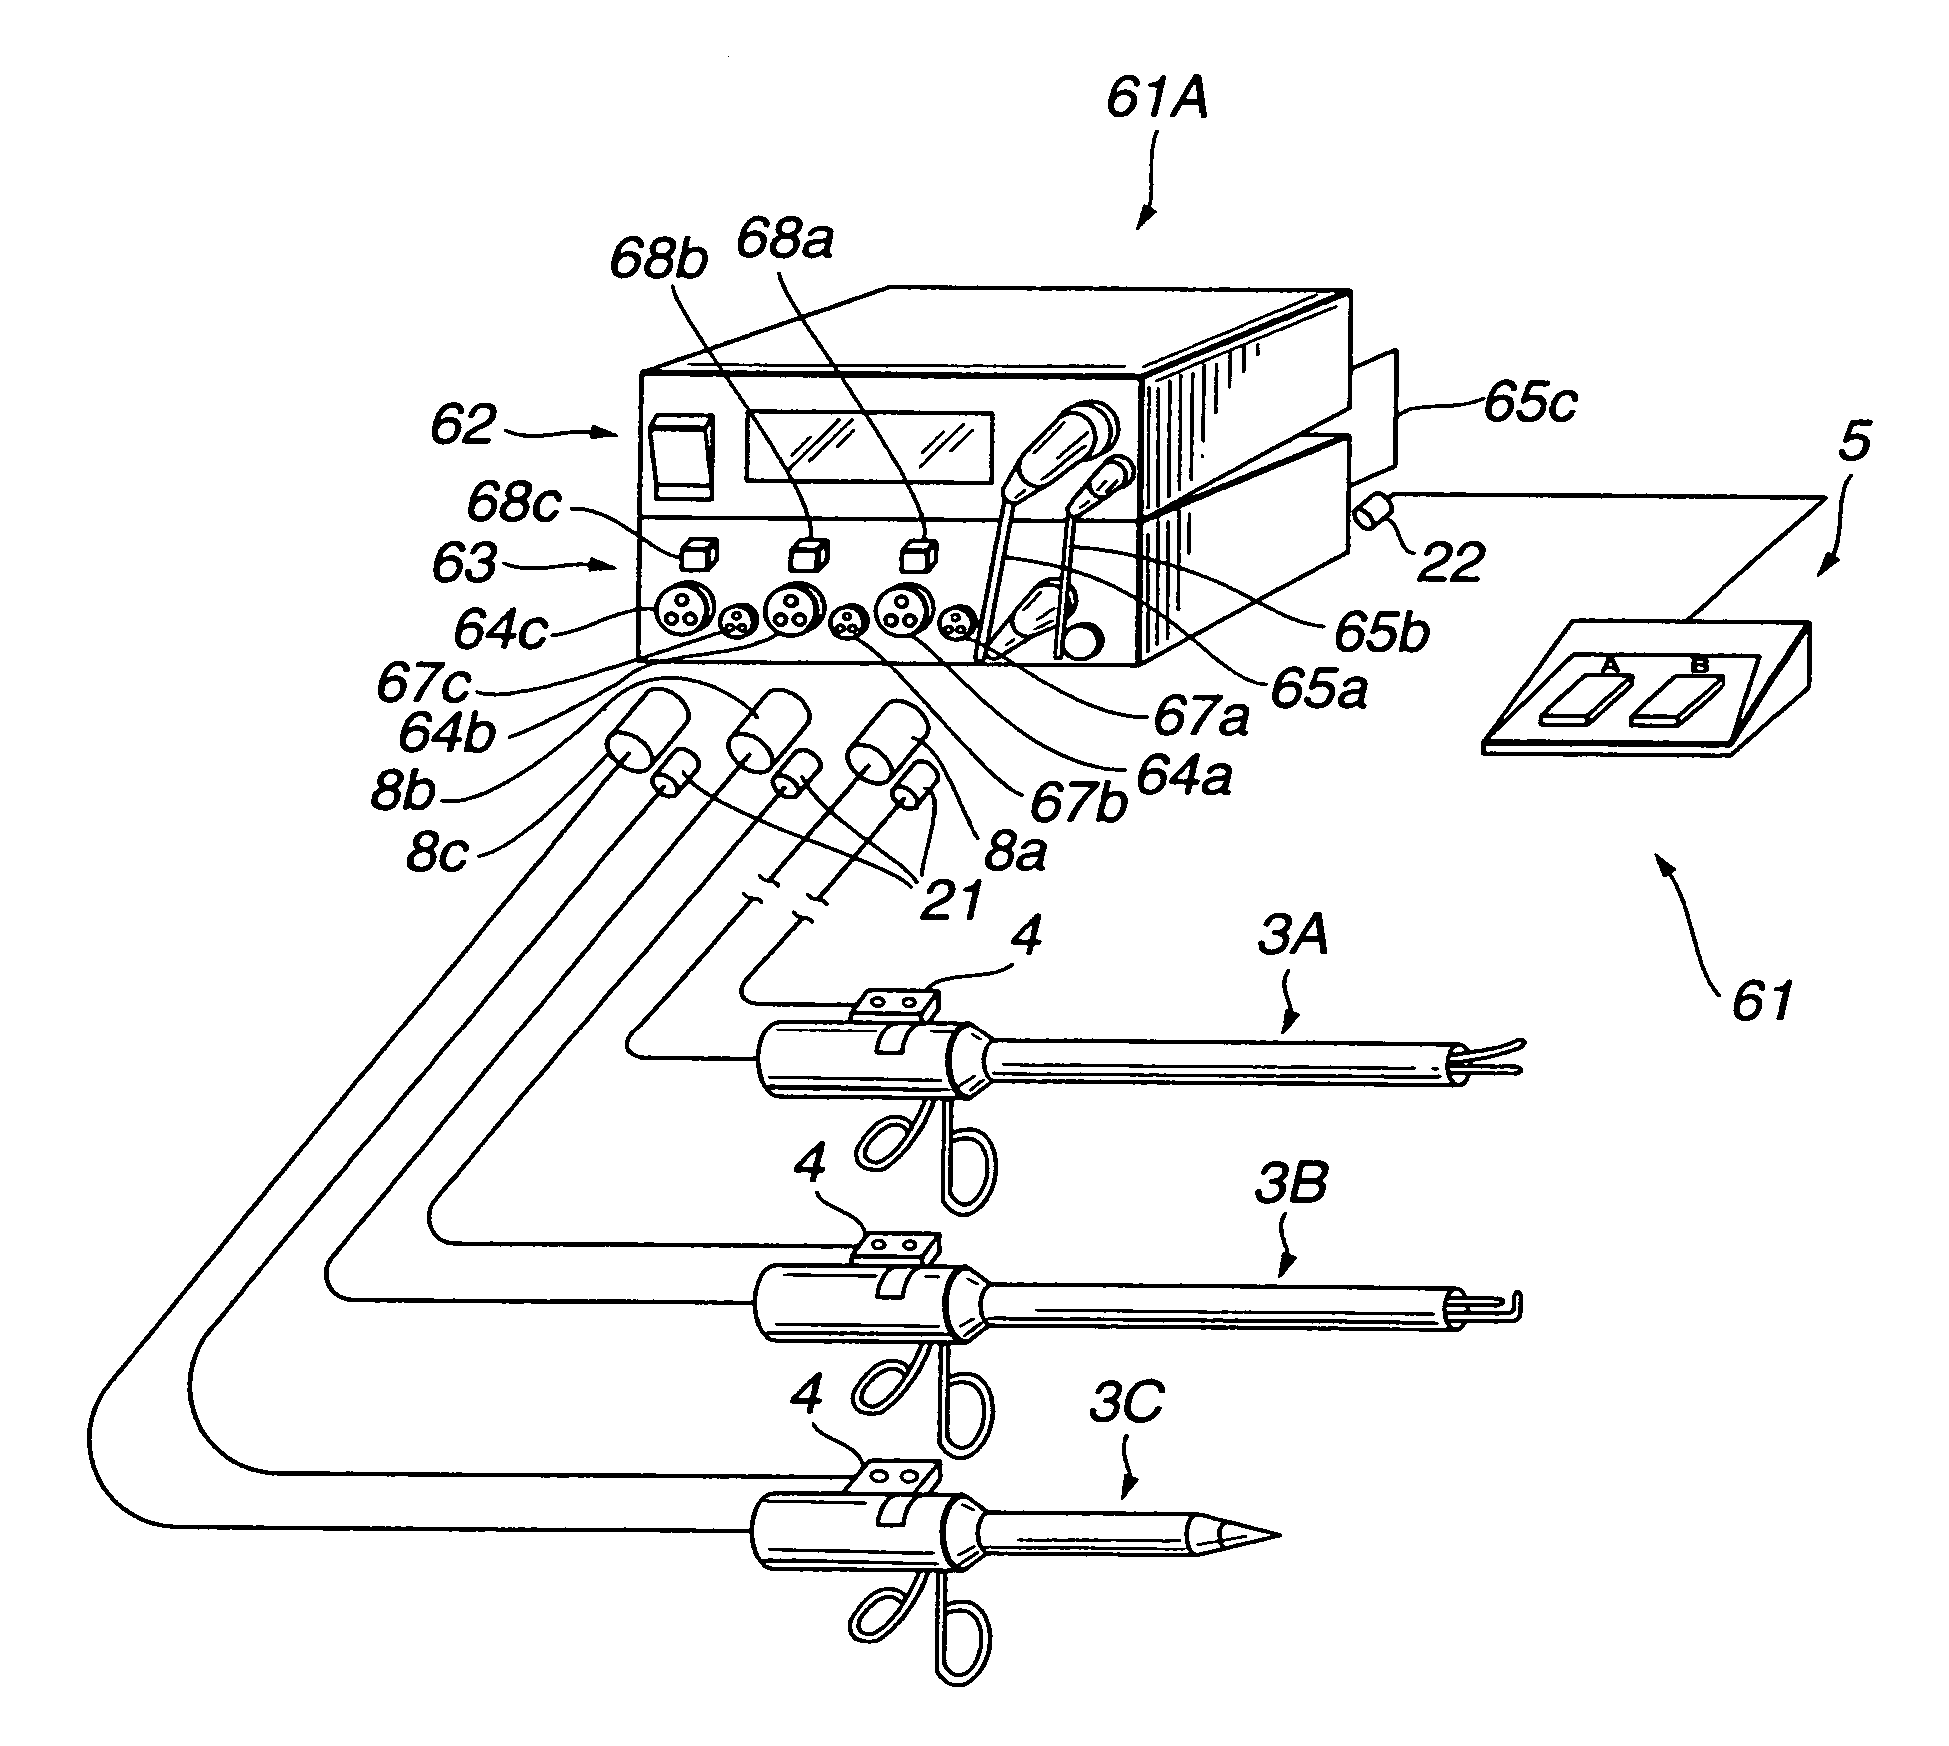 Ultrasonic surgical system